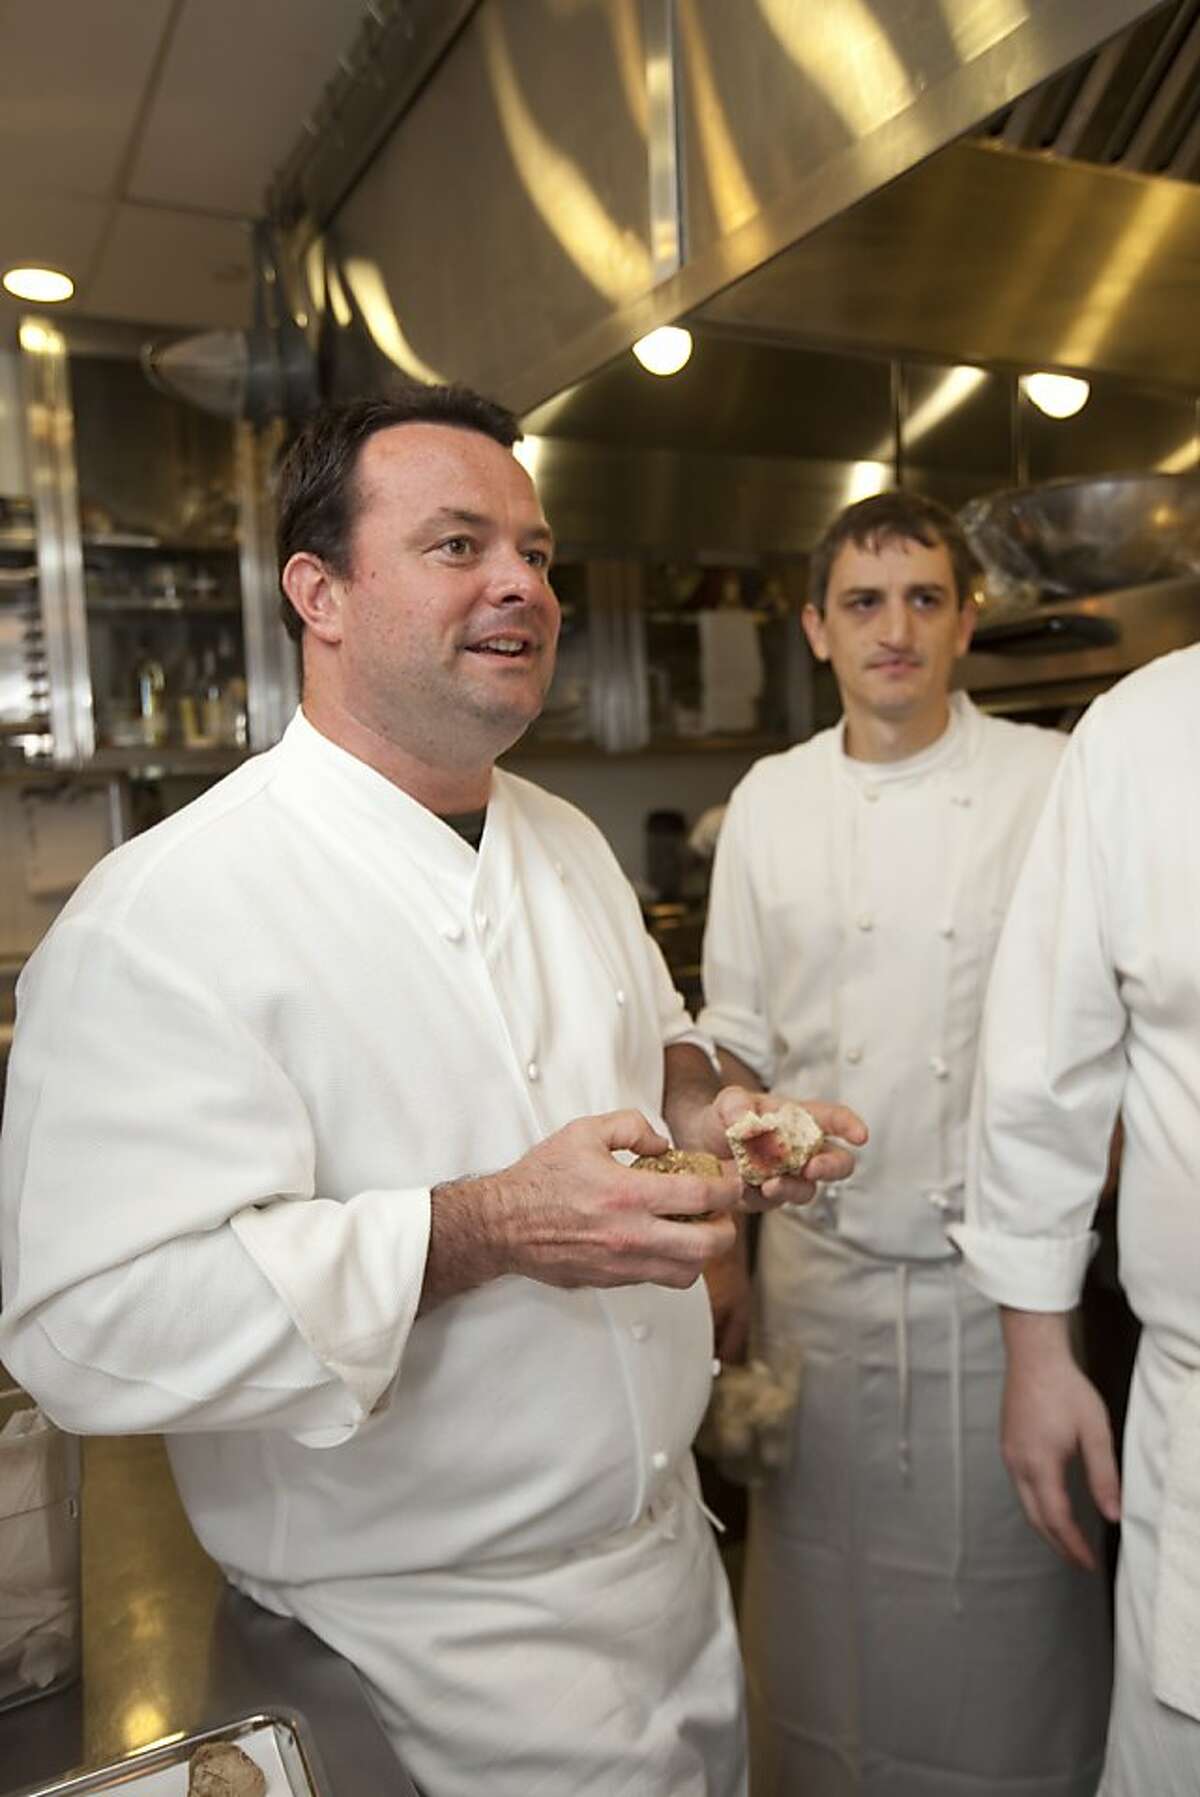 New caption: Douglas Keane, who closed the four-star Cyrus in 2012, is resurrecting the restaurant for a three-night pop-up at San Francisco's Jardiniere in April. Douglas Keane (left), chef and owner of Cyrus restaurant in Healdsburg, California on Thursday, October 25, 2012.